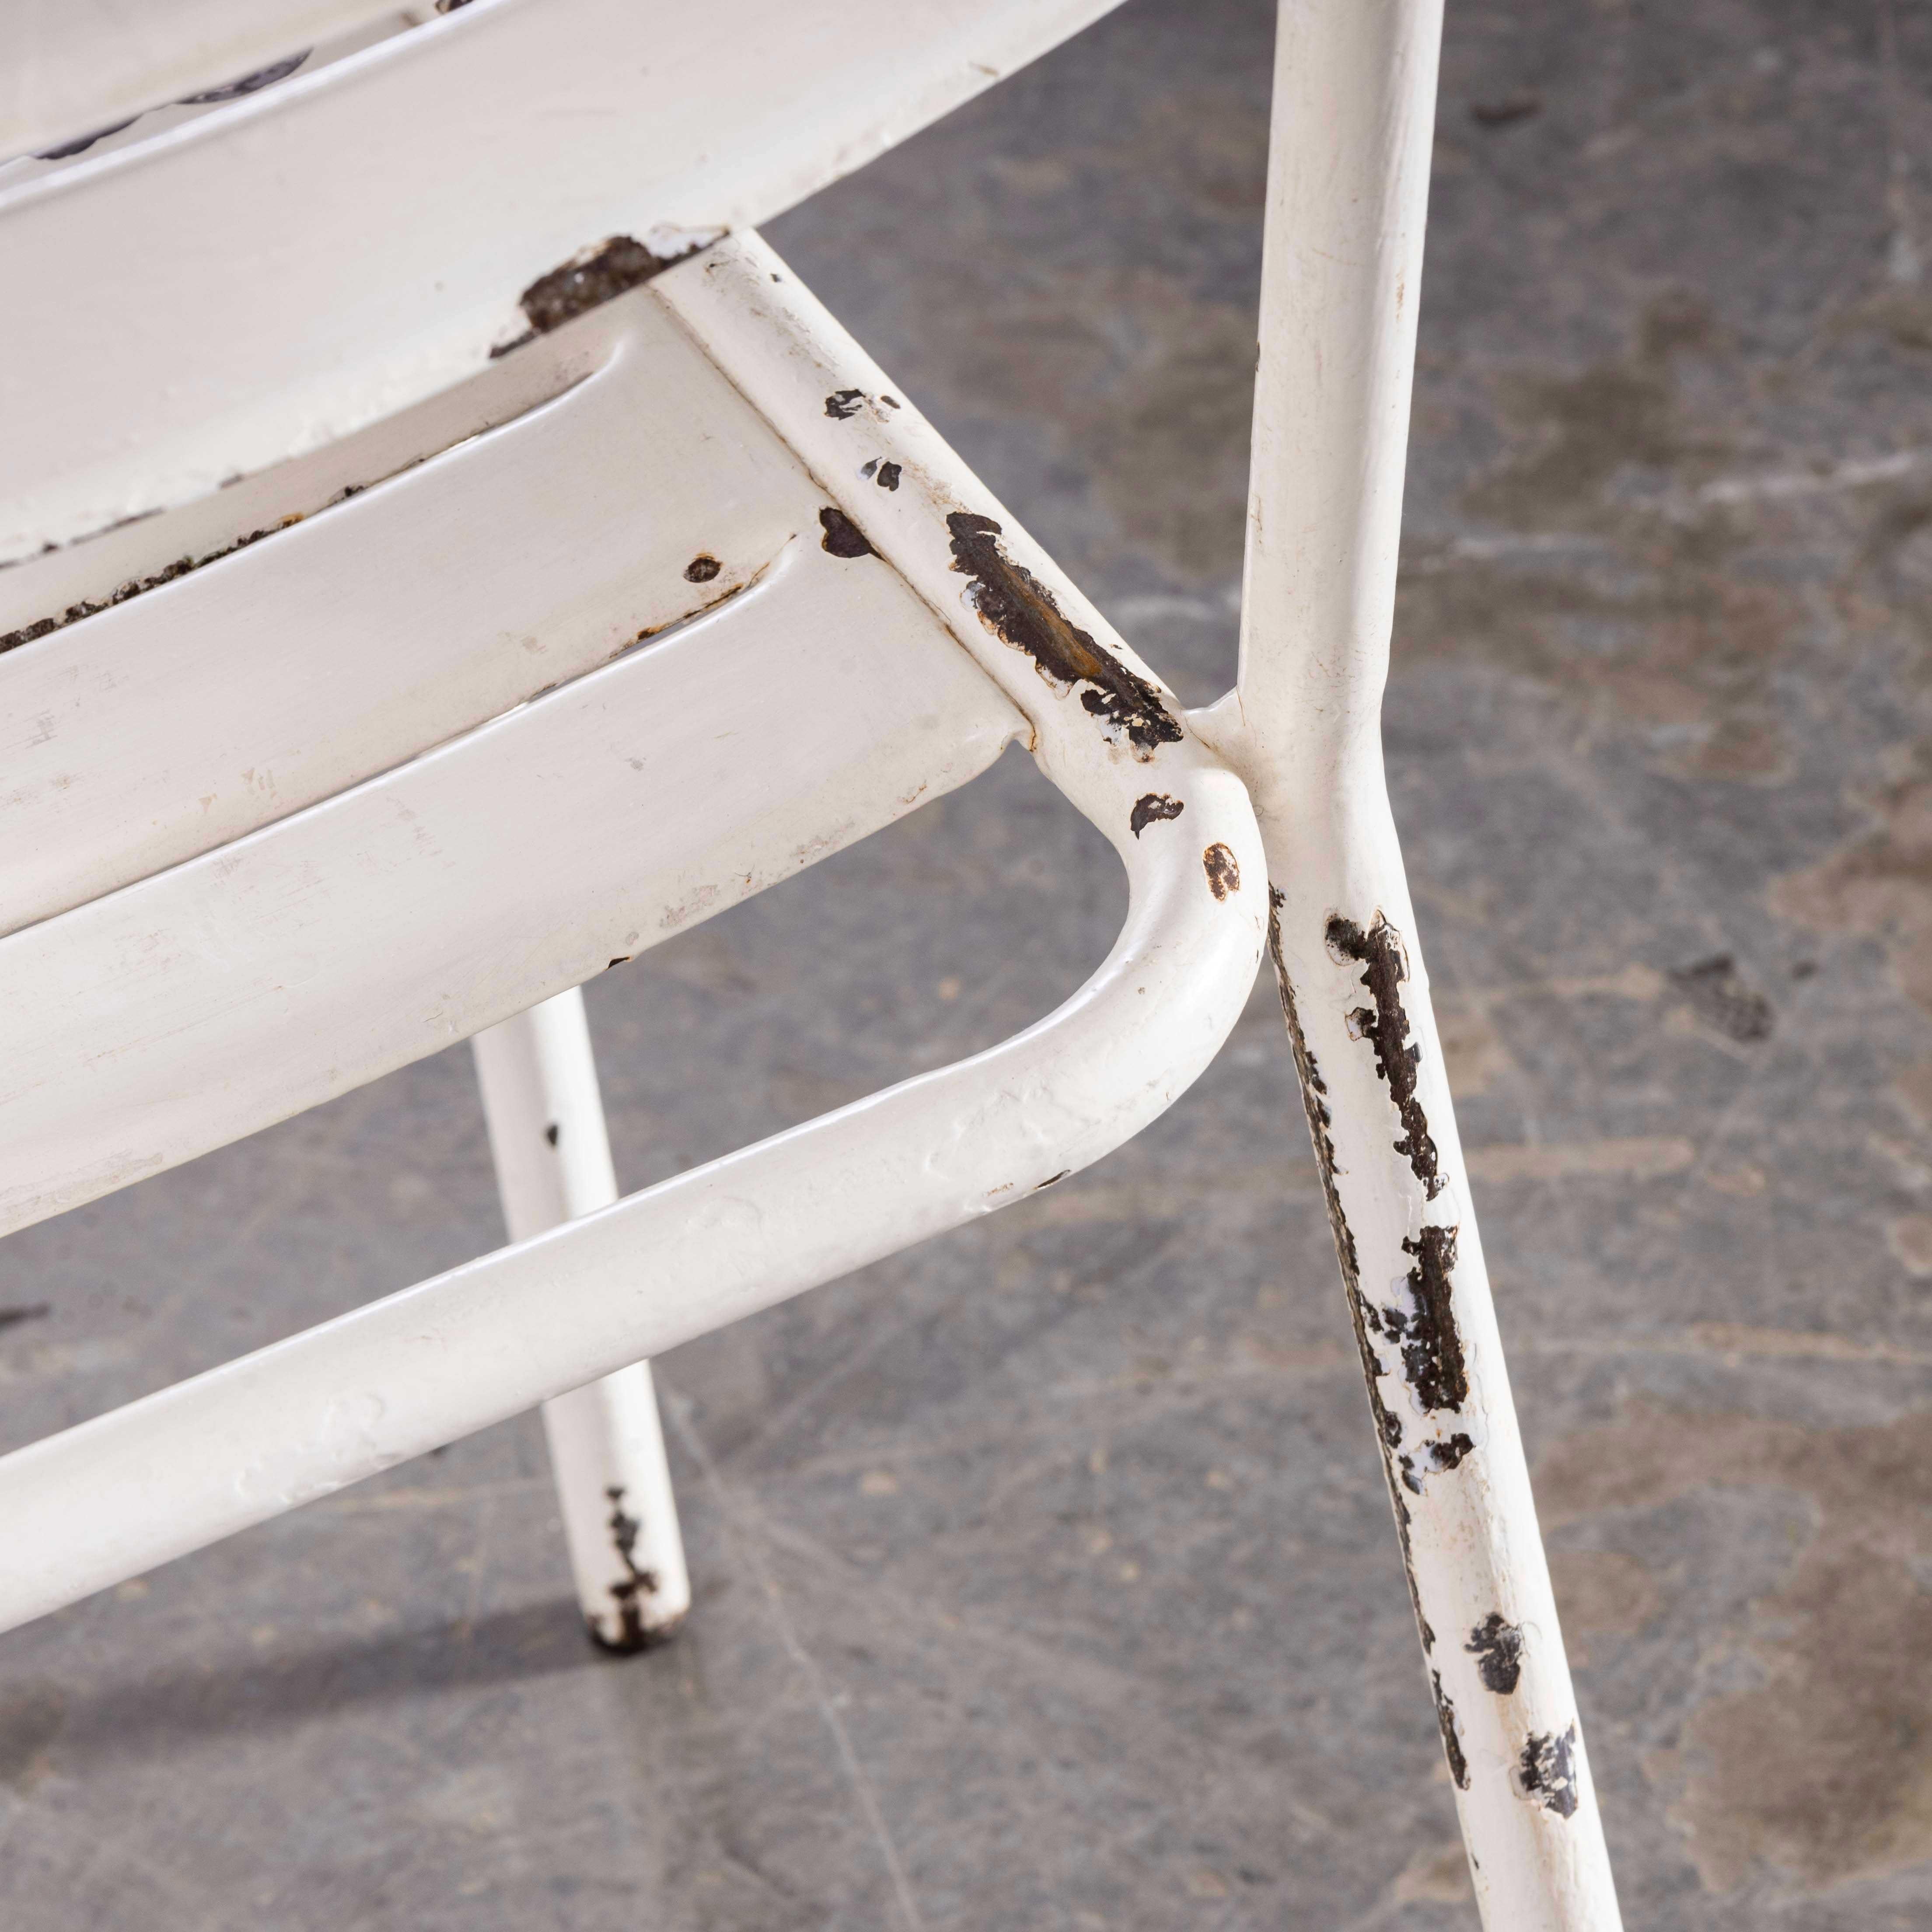 1950’s French White Metal Stacking Outdoor Chairs – Good Quantities Available
1950’s French White Metal Stacking Outdoor Chairs – Good Quantities Available. Reminiscent of Tolix but not made by Tolix, this style of chair was industrially produced in